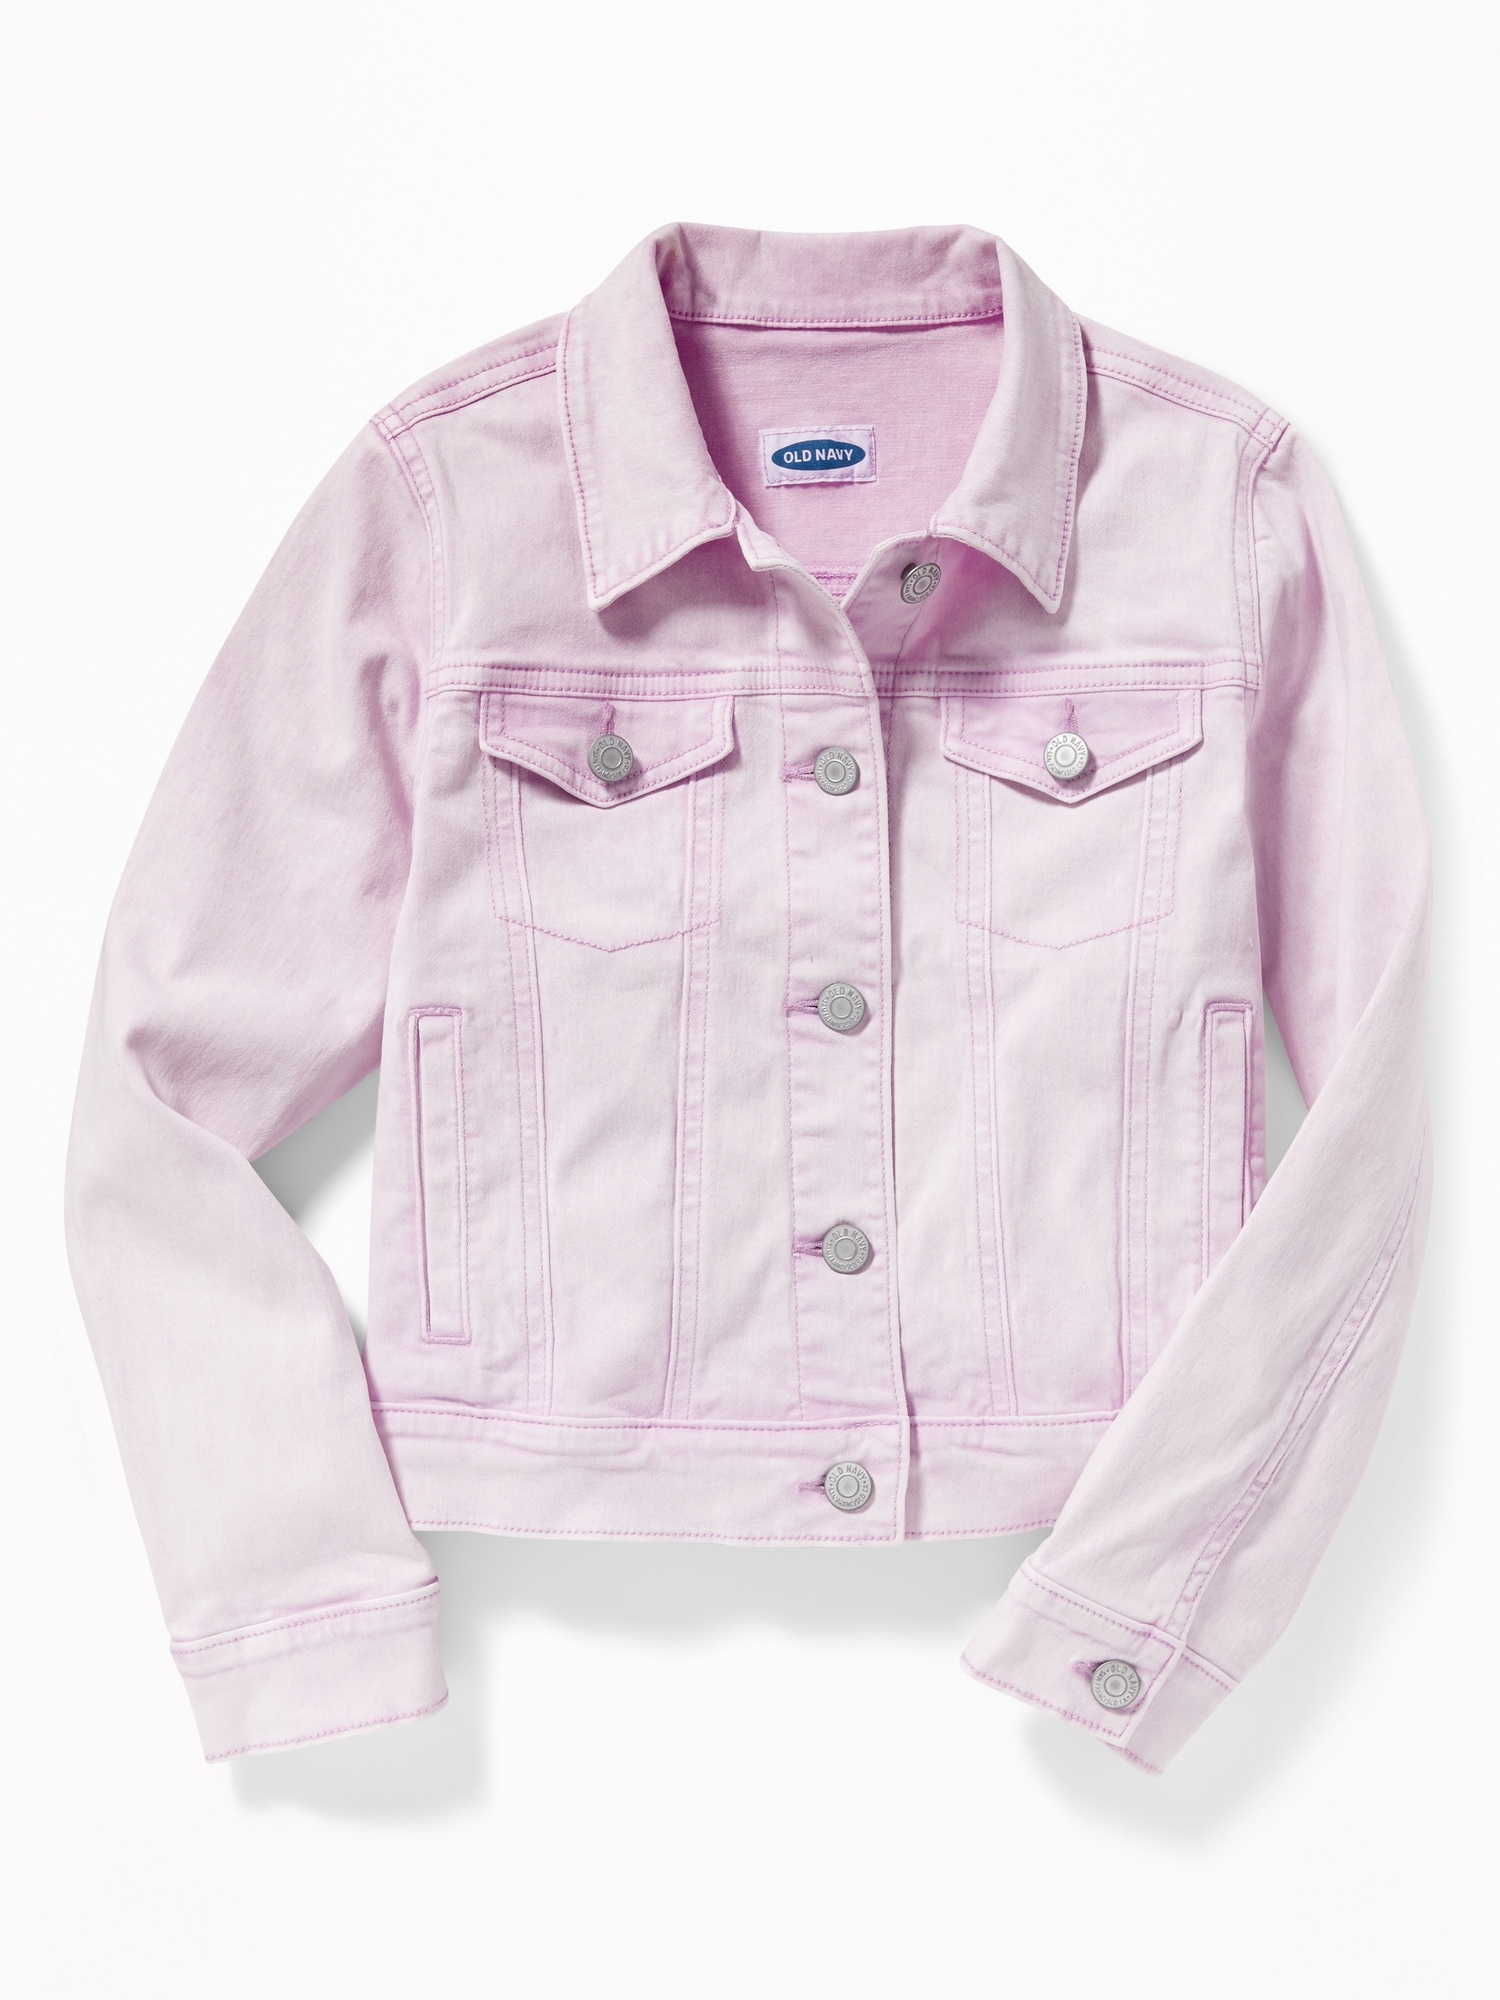 Lilac-Wash Jean Jacket For Girls | Old Navy